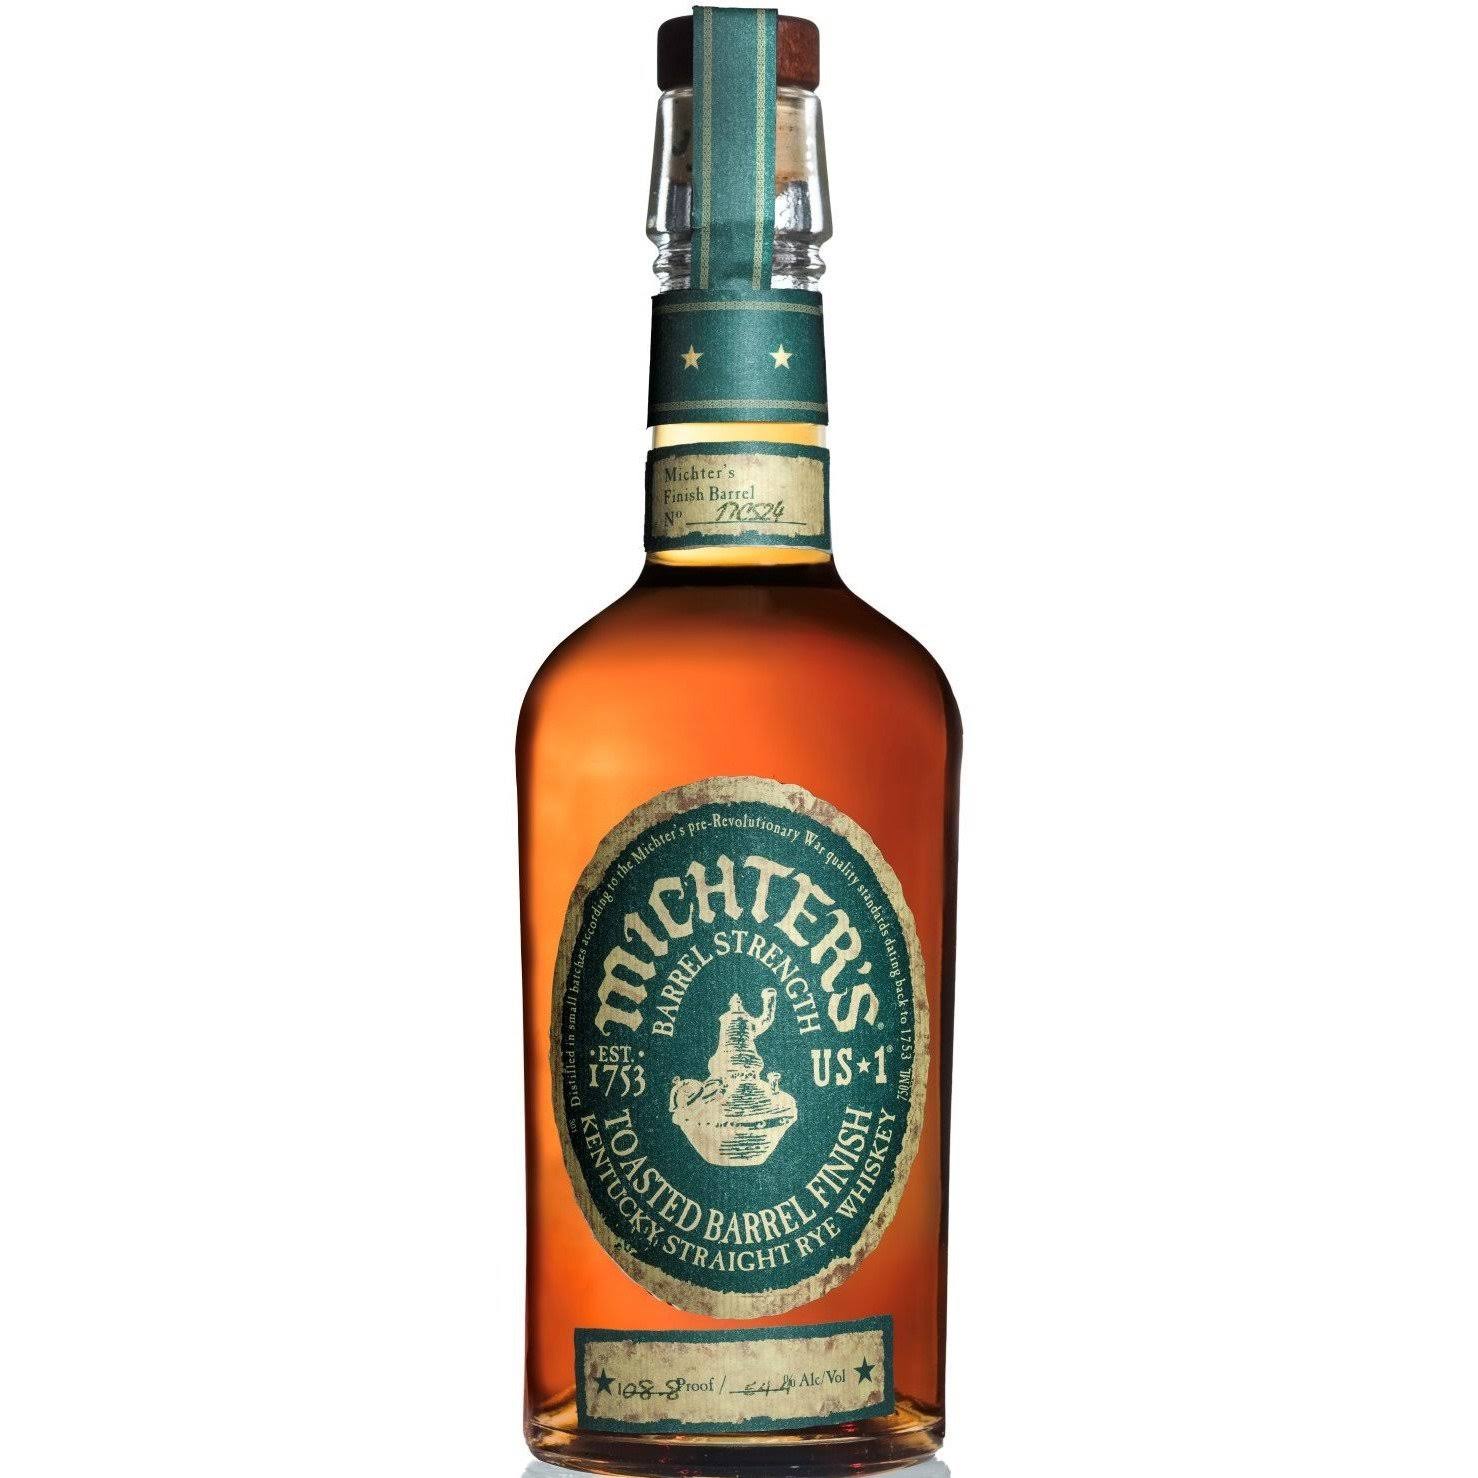 Michter's Toasted Barrel Finish Rye (750 ml)